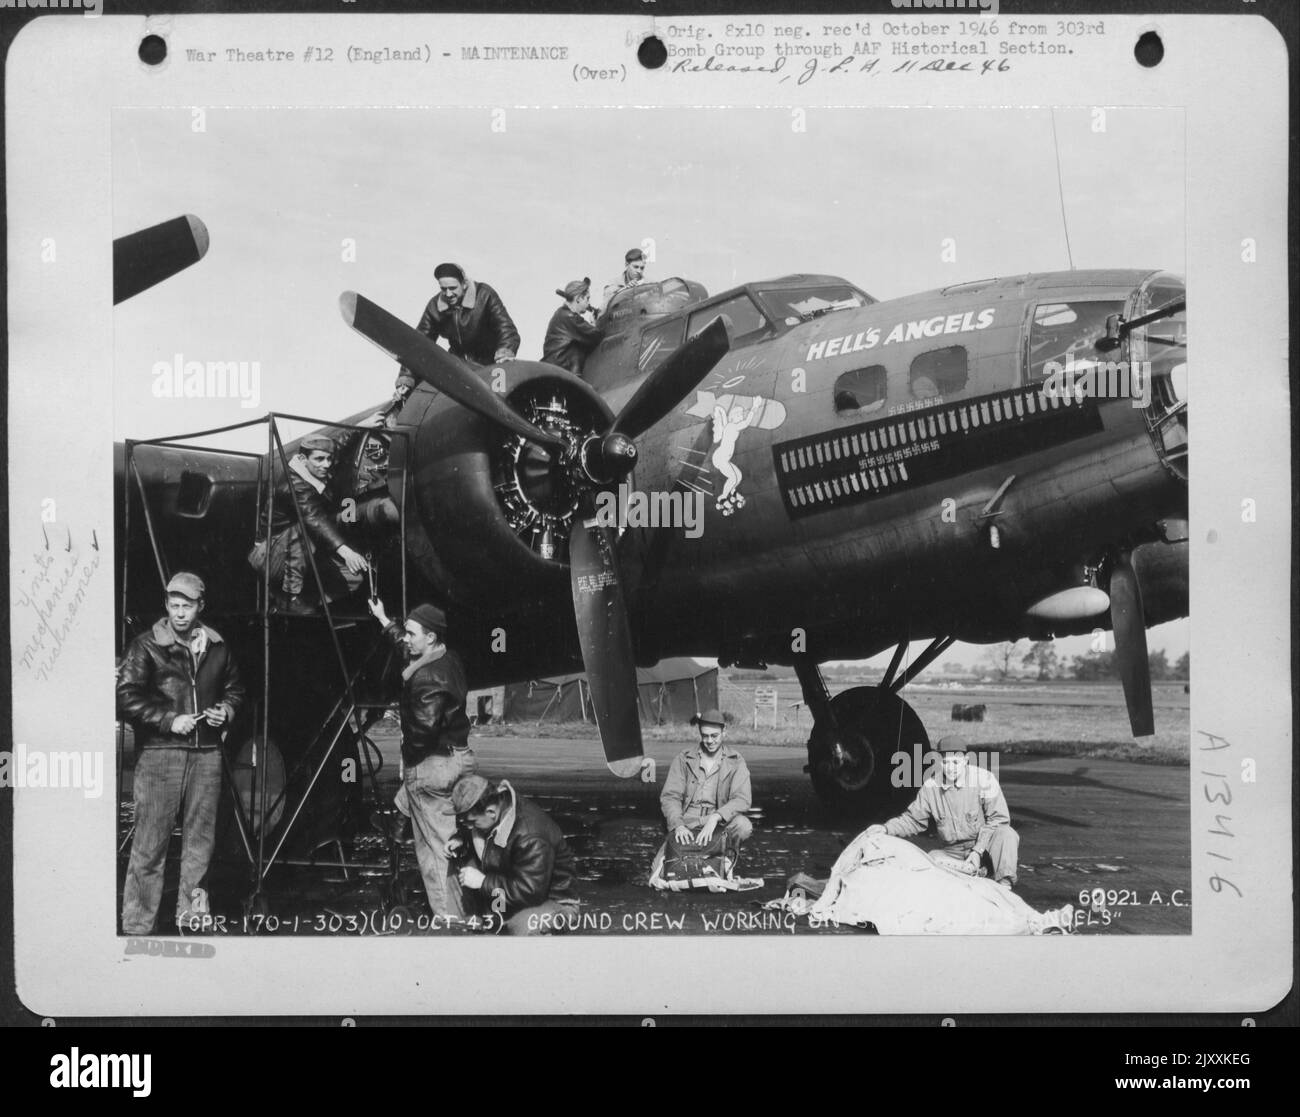 Maintenance Of The Boeing B-17 'Flying Fortress' 'Hell'S Angels' By Ground Crew, 303Rd Bomb Group. England, 10 October 1943. Stock Photo